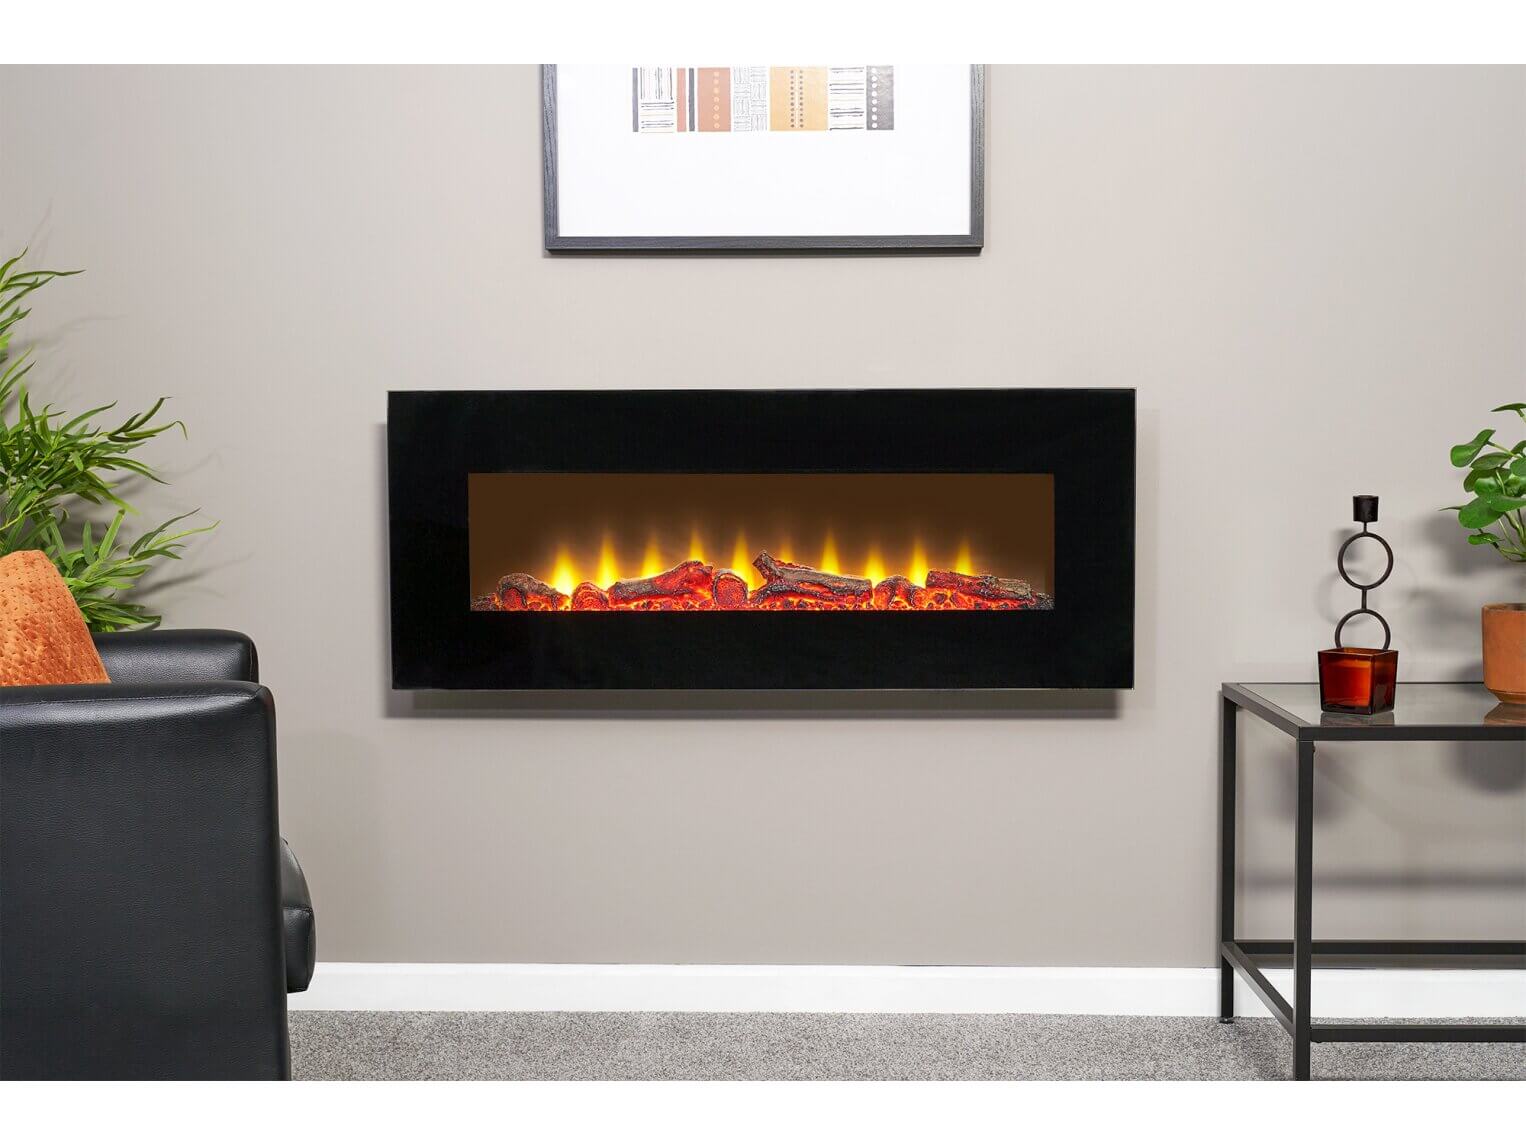 Sureflame WM-9331 Electric Wall Mounted Fire with Remote in Black, 42 Inch - Glowing Flames